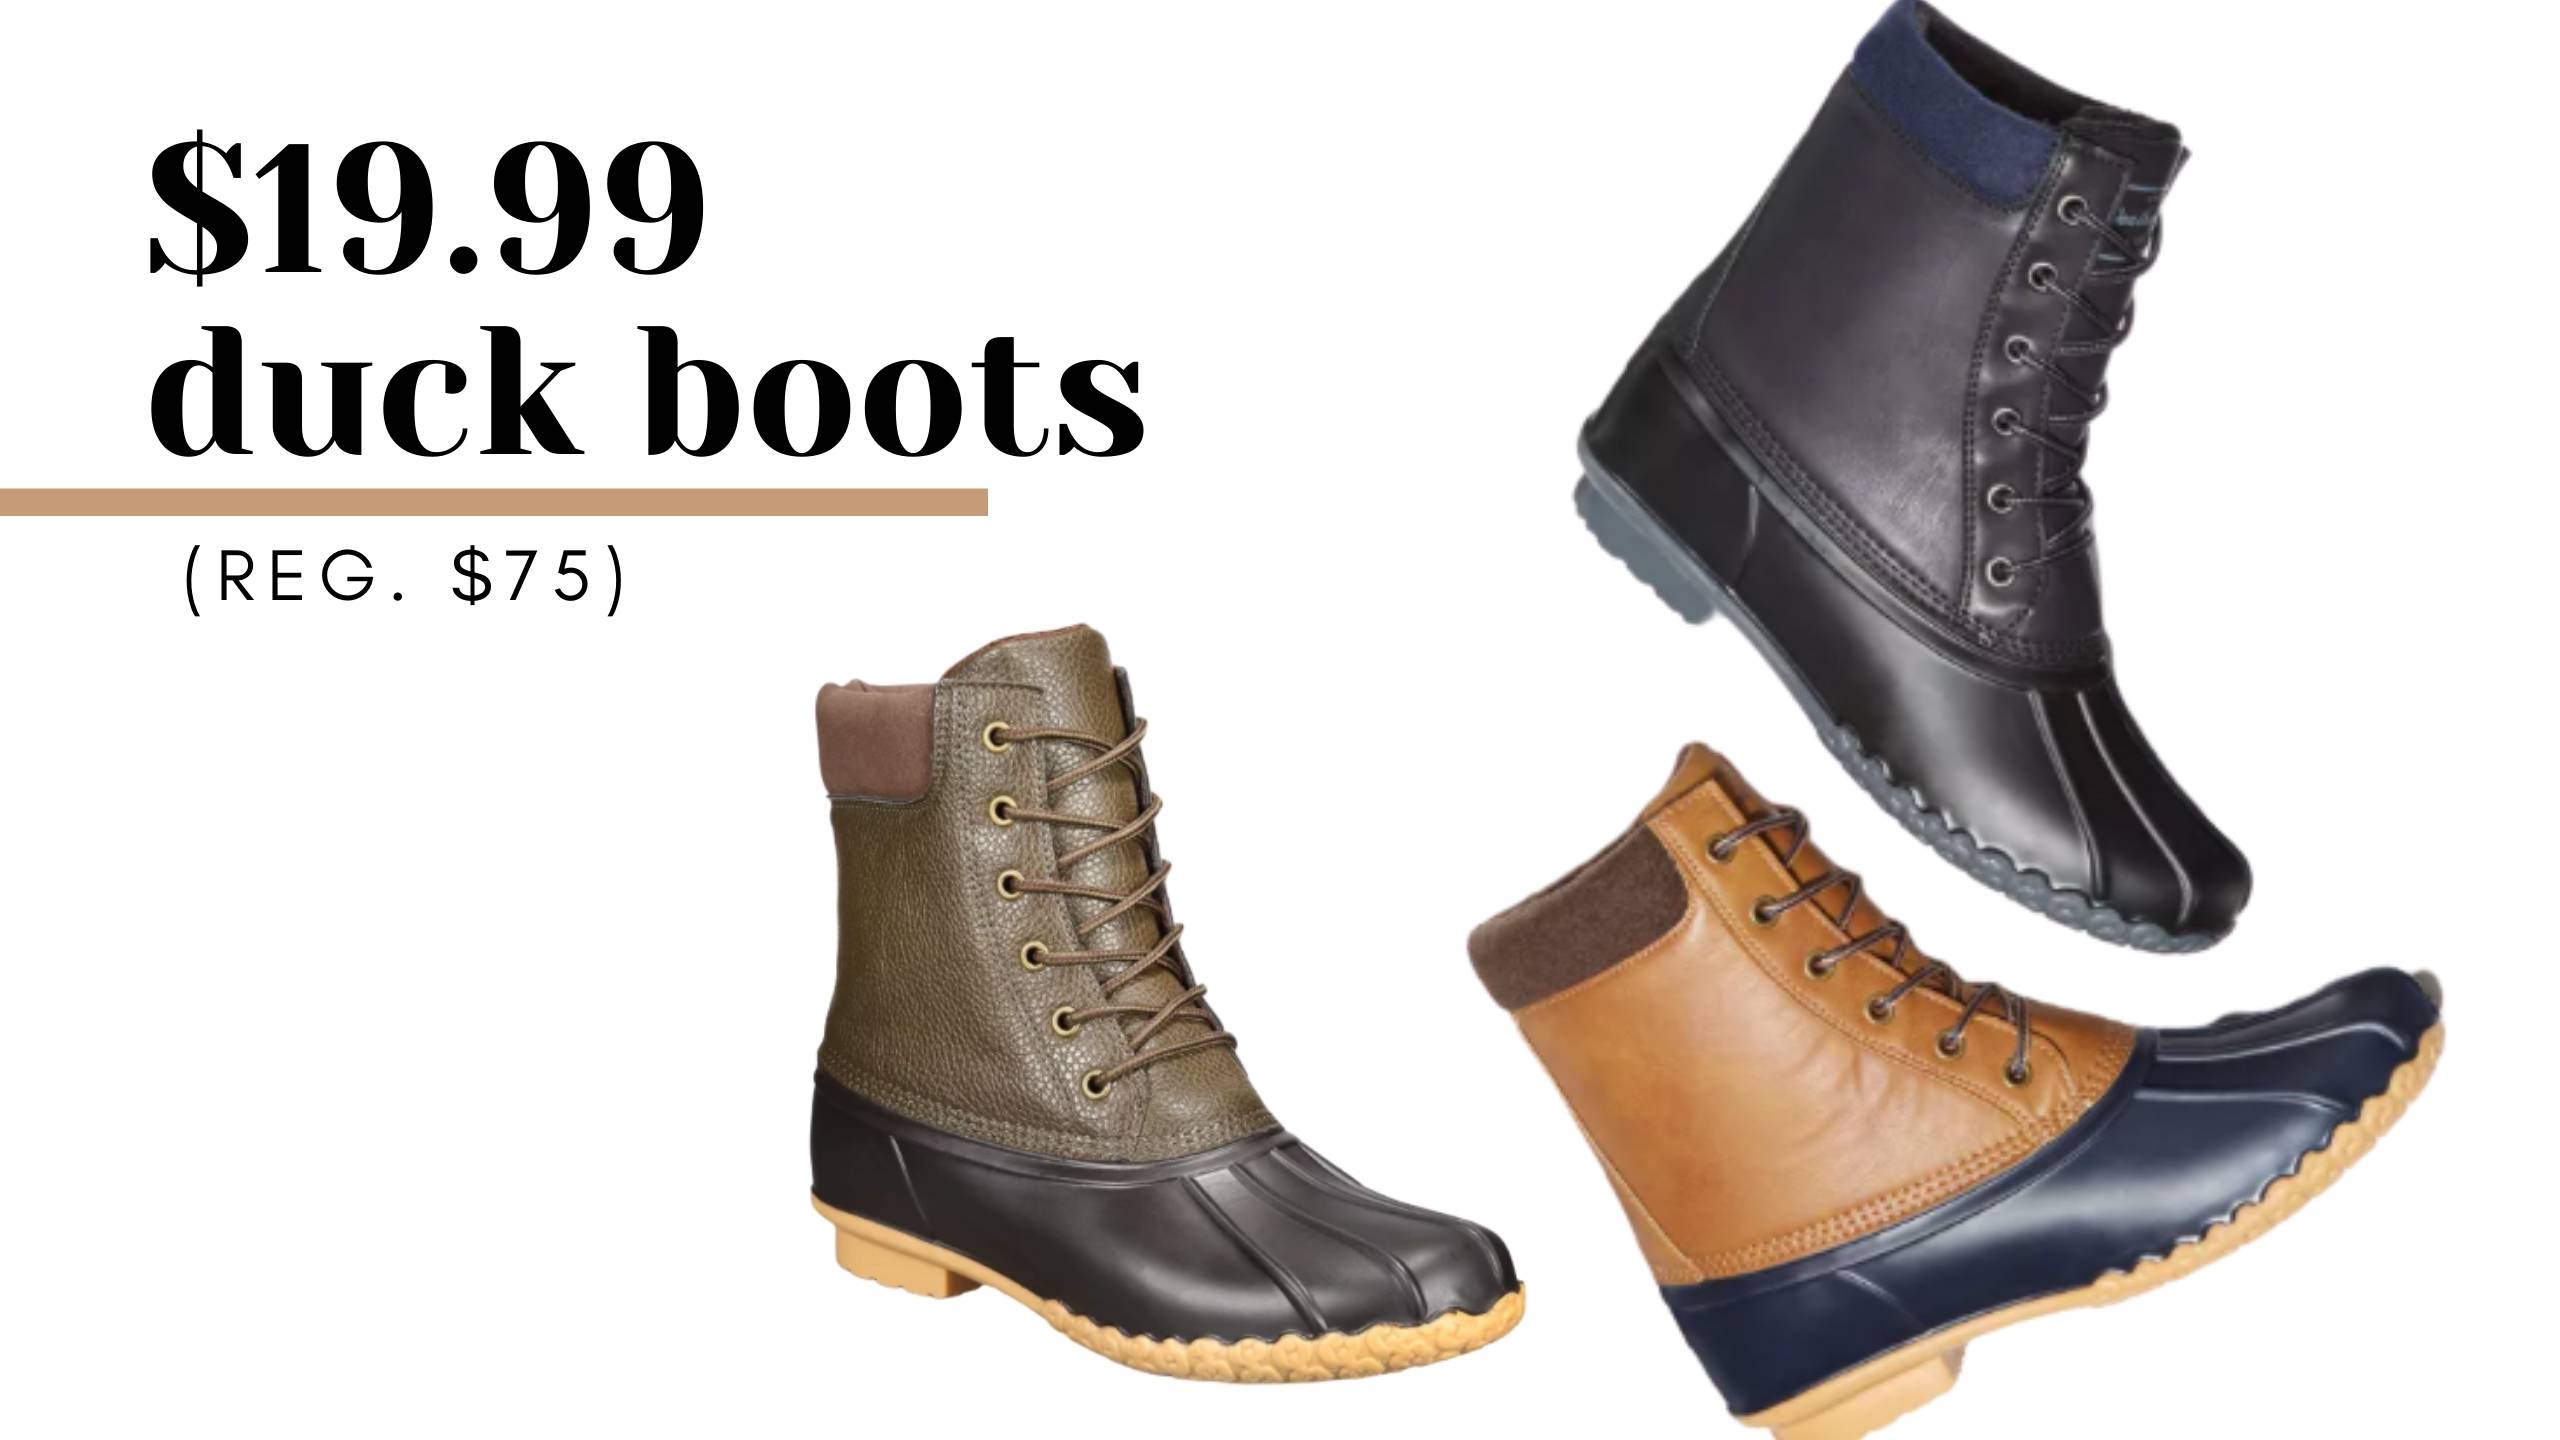 Weatherproof Men's Duck Boots for $19.99 :: Southern Savers